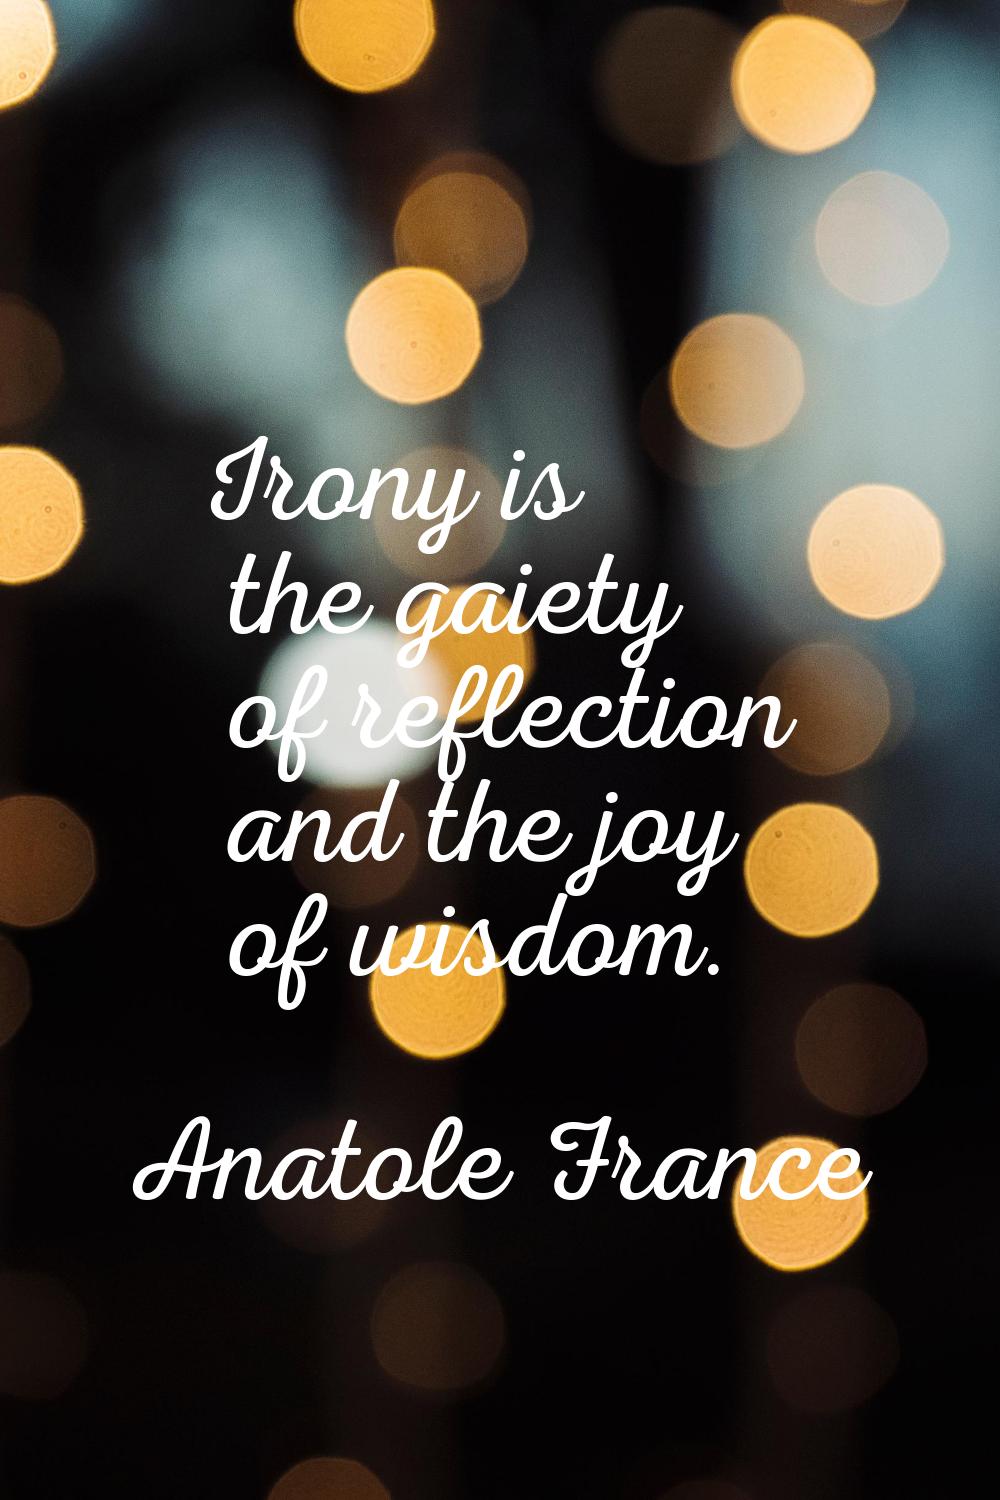 Irony is the gaiety of reflection and the joy of wisdom.